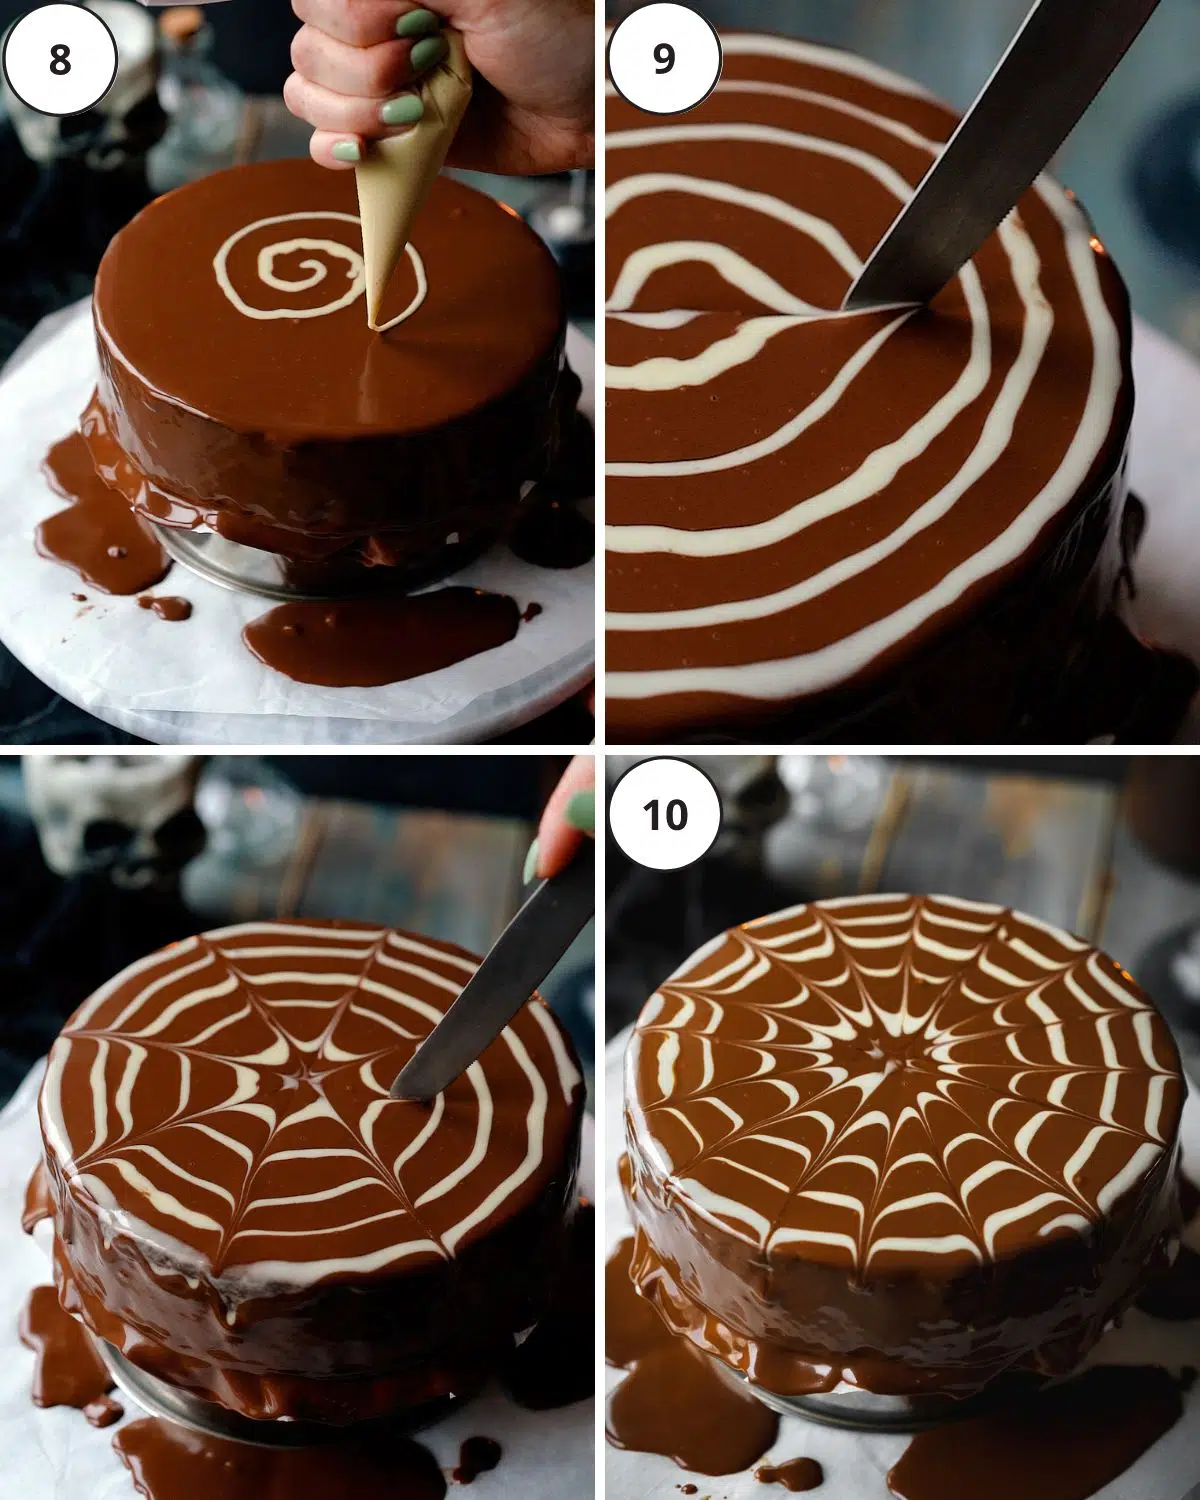 chocolate glazed cake with a spider web design on top made by swirling white chocolate.